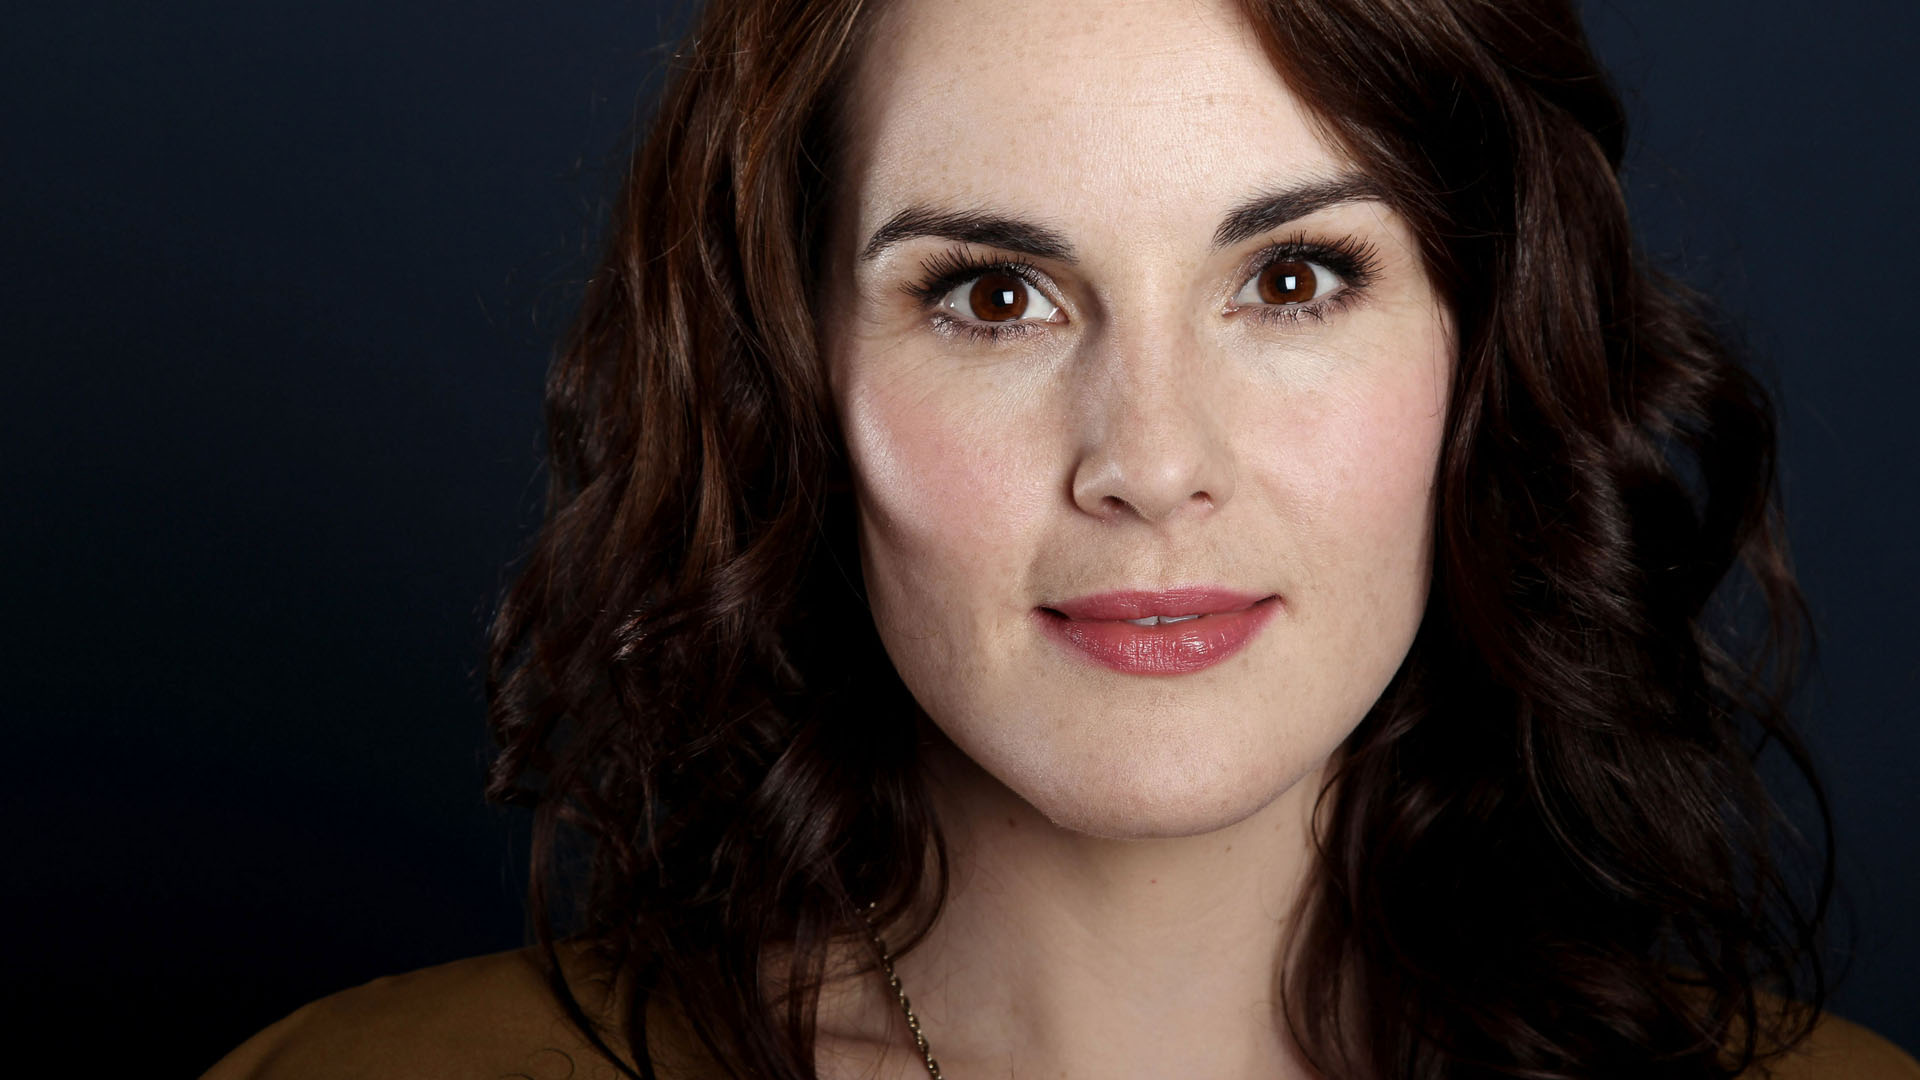 Did Michelle Dockery Undergo Plastic Surgery? Body Measurements and More!